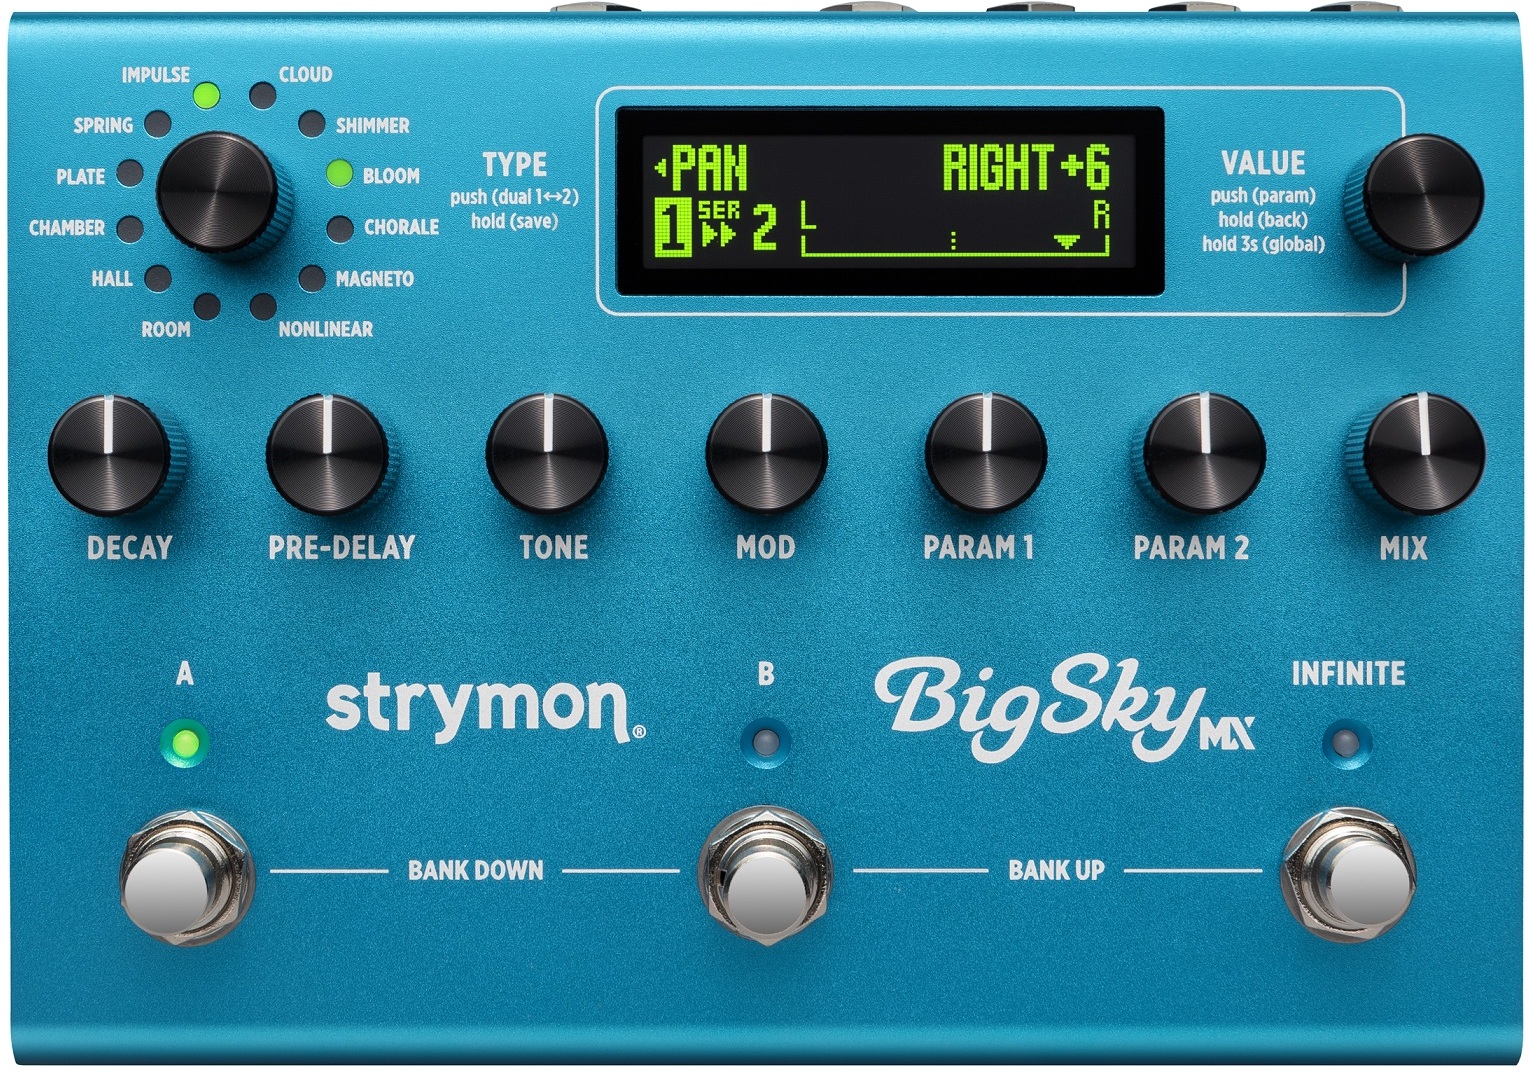 Strymon Bigsky Mx - Reverb/delay/echo effect pedaal - Main picture